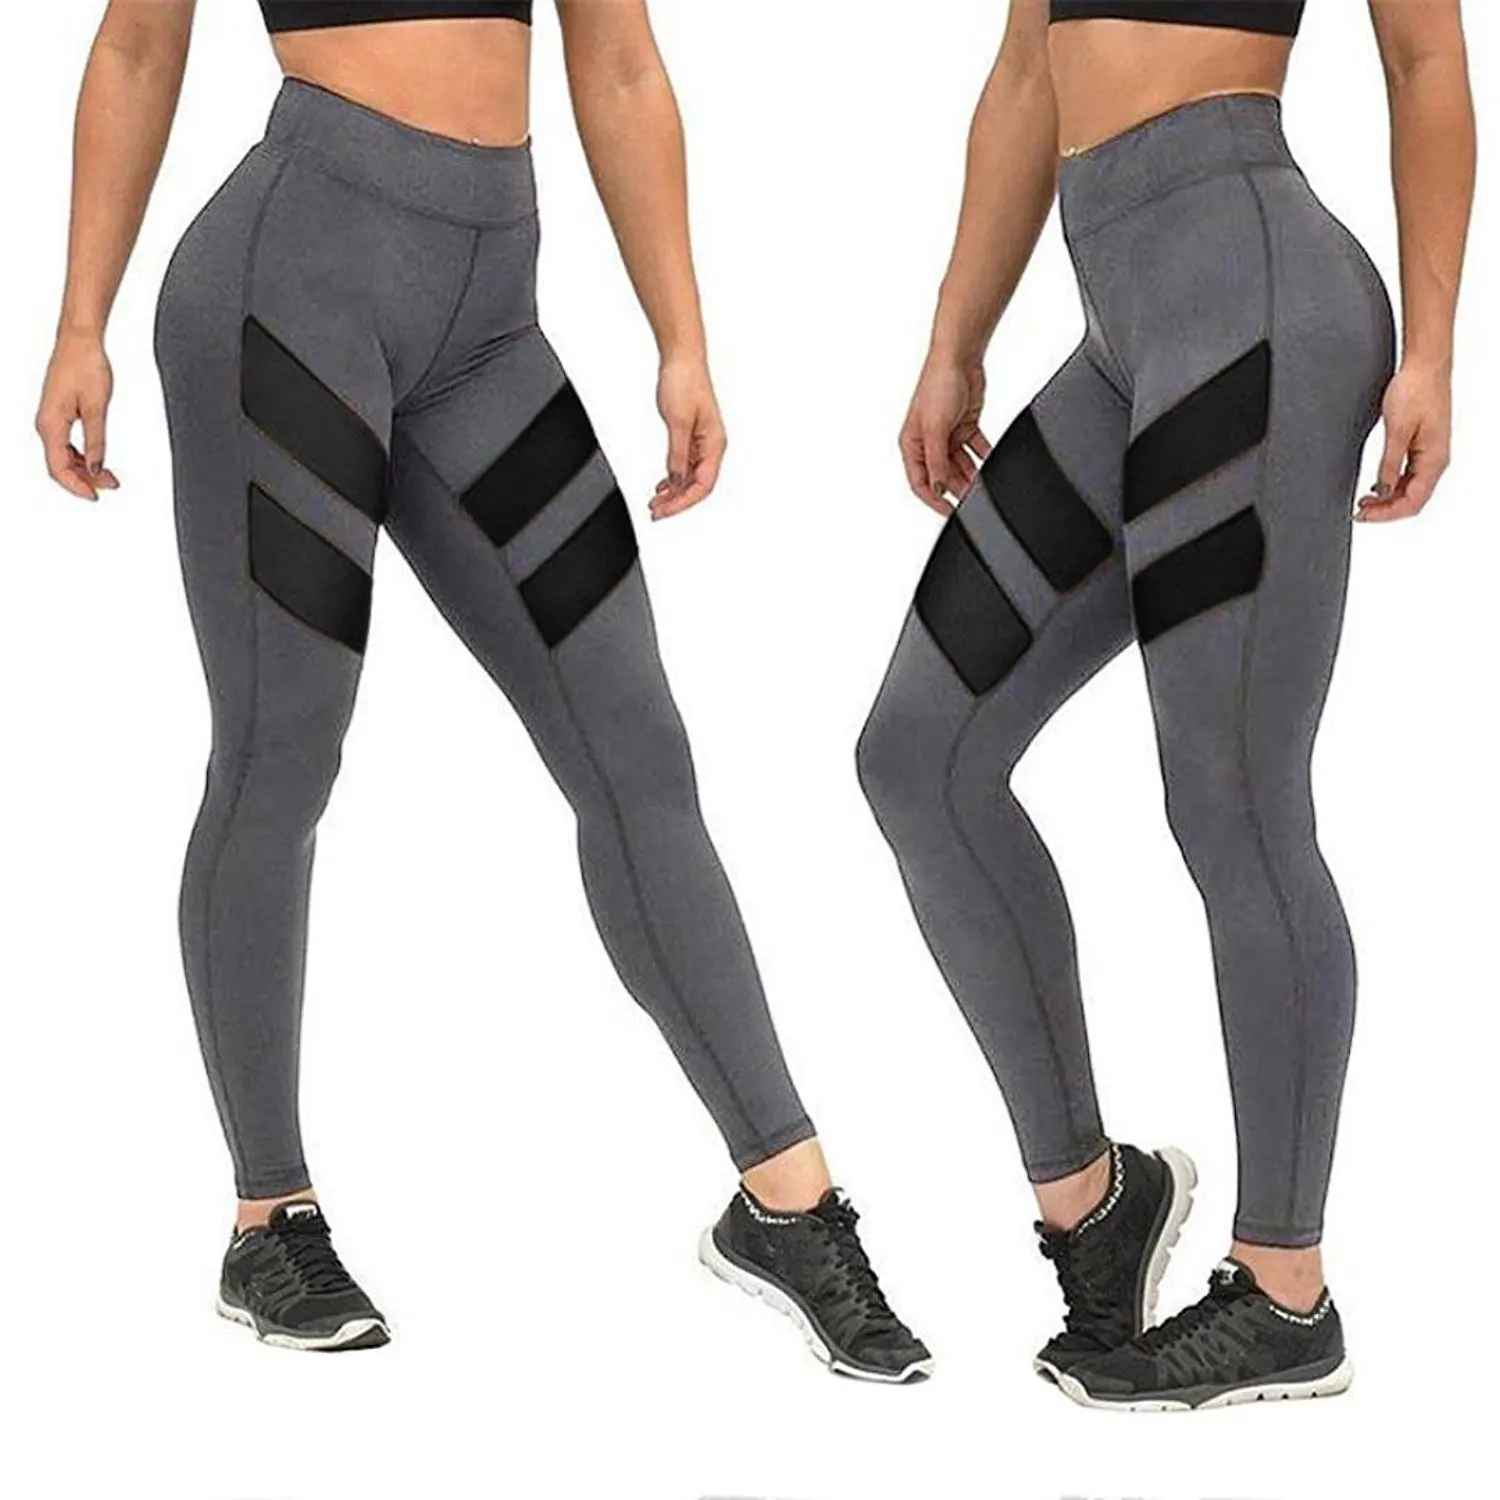 Cheap Yoga Leggings Sexy Find Yoga Leggings Sexy Deals On Line At